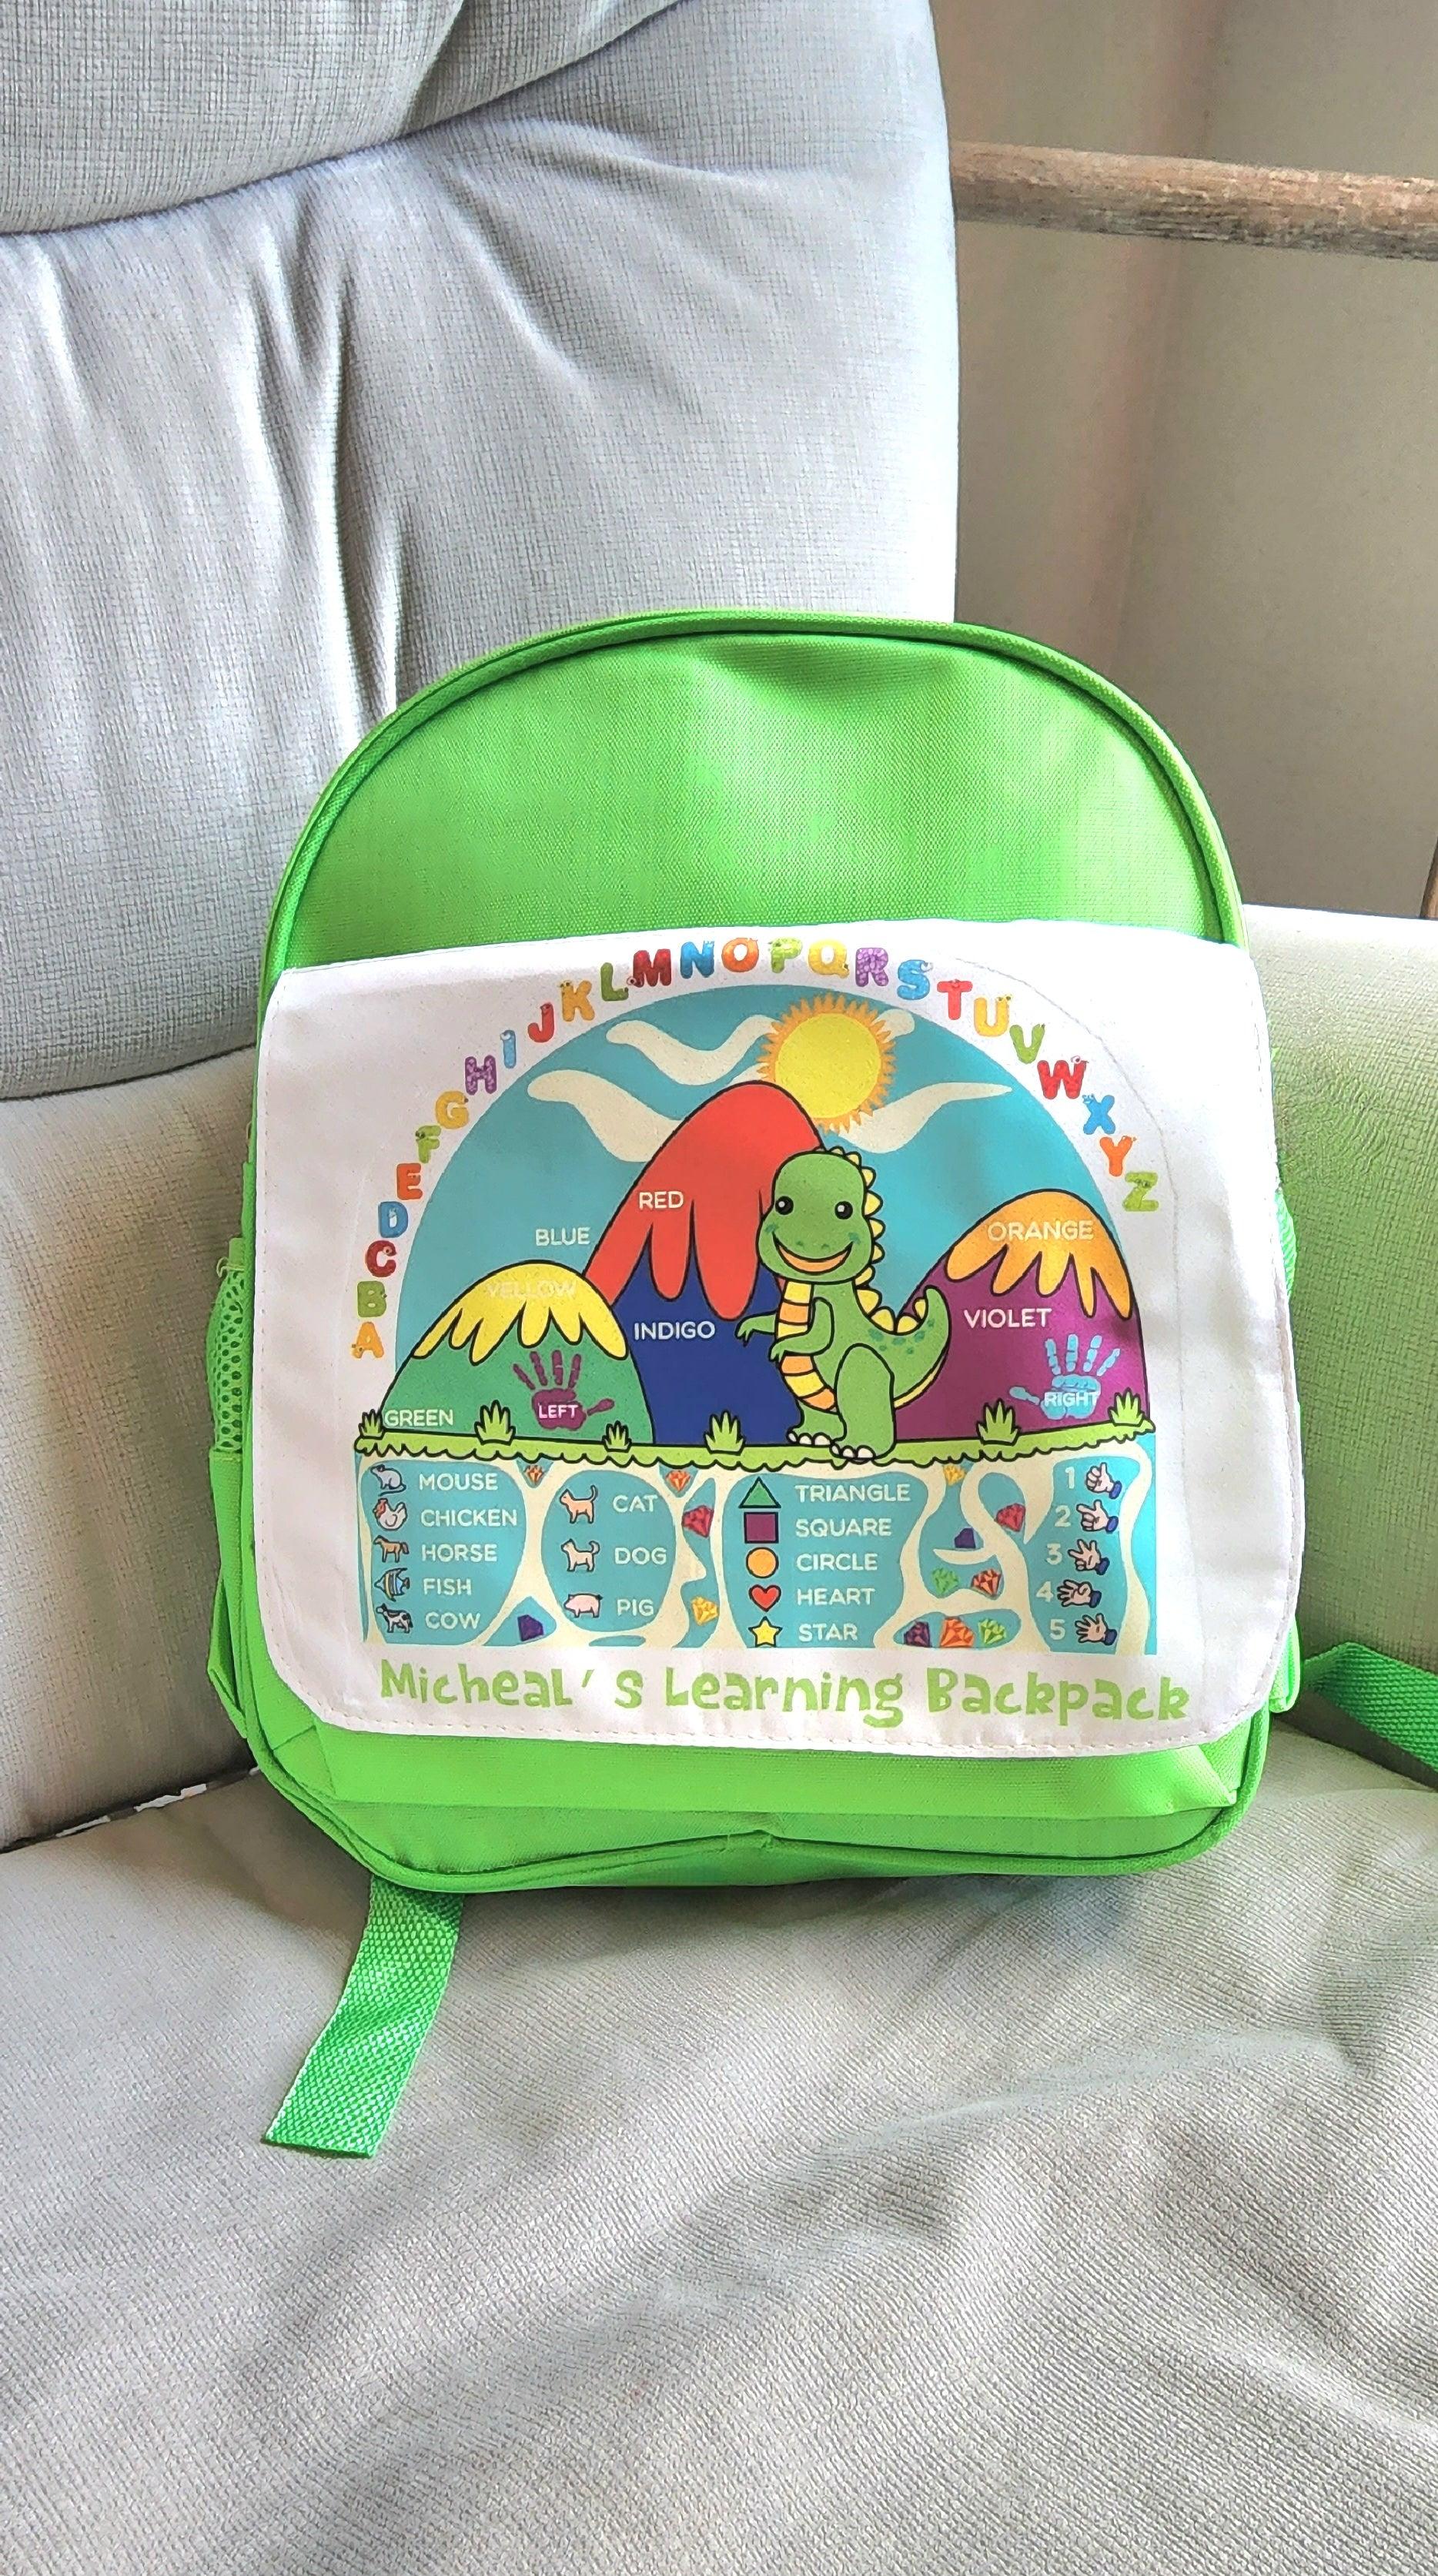 This personalized Dinosaur bag makes a great gift for any boy who loves dinosaurs. It can be used for the baby, toddler or child's everyday needs to include hold bottles, diapers, wipes, small toys, small tablet, journal, library books etc. It is also useful to hold extra pair of clothes, water bottle and snacks for tumbling/gymnastics practice.